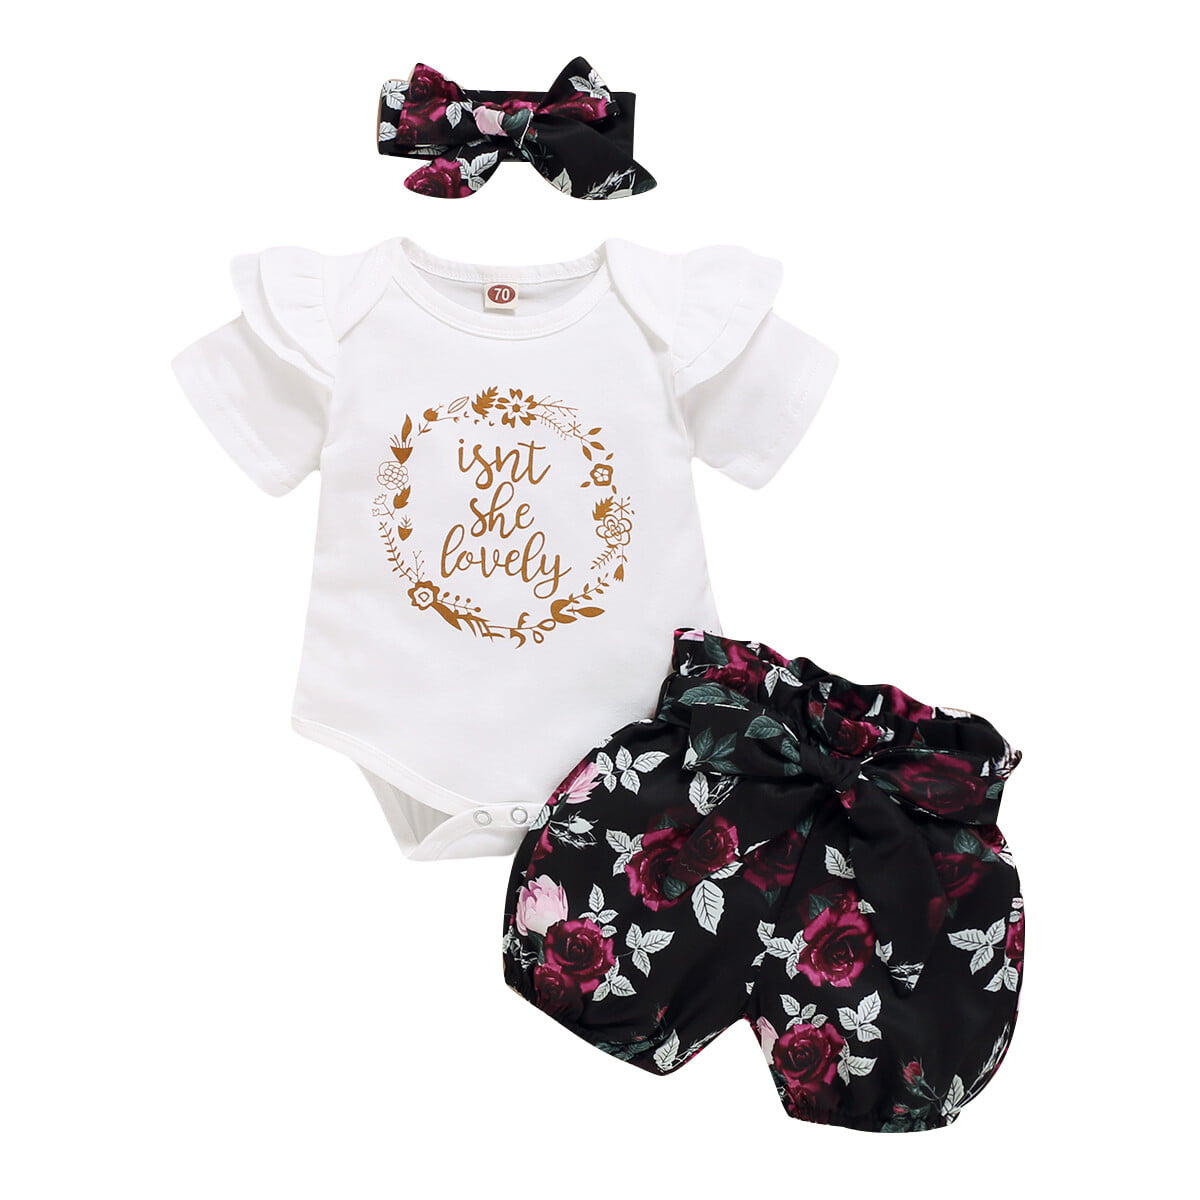 Baby Girls Sleepsuit Hat All in One 2 Piece Set Clothes Outfit Flowers Cutie Pie 